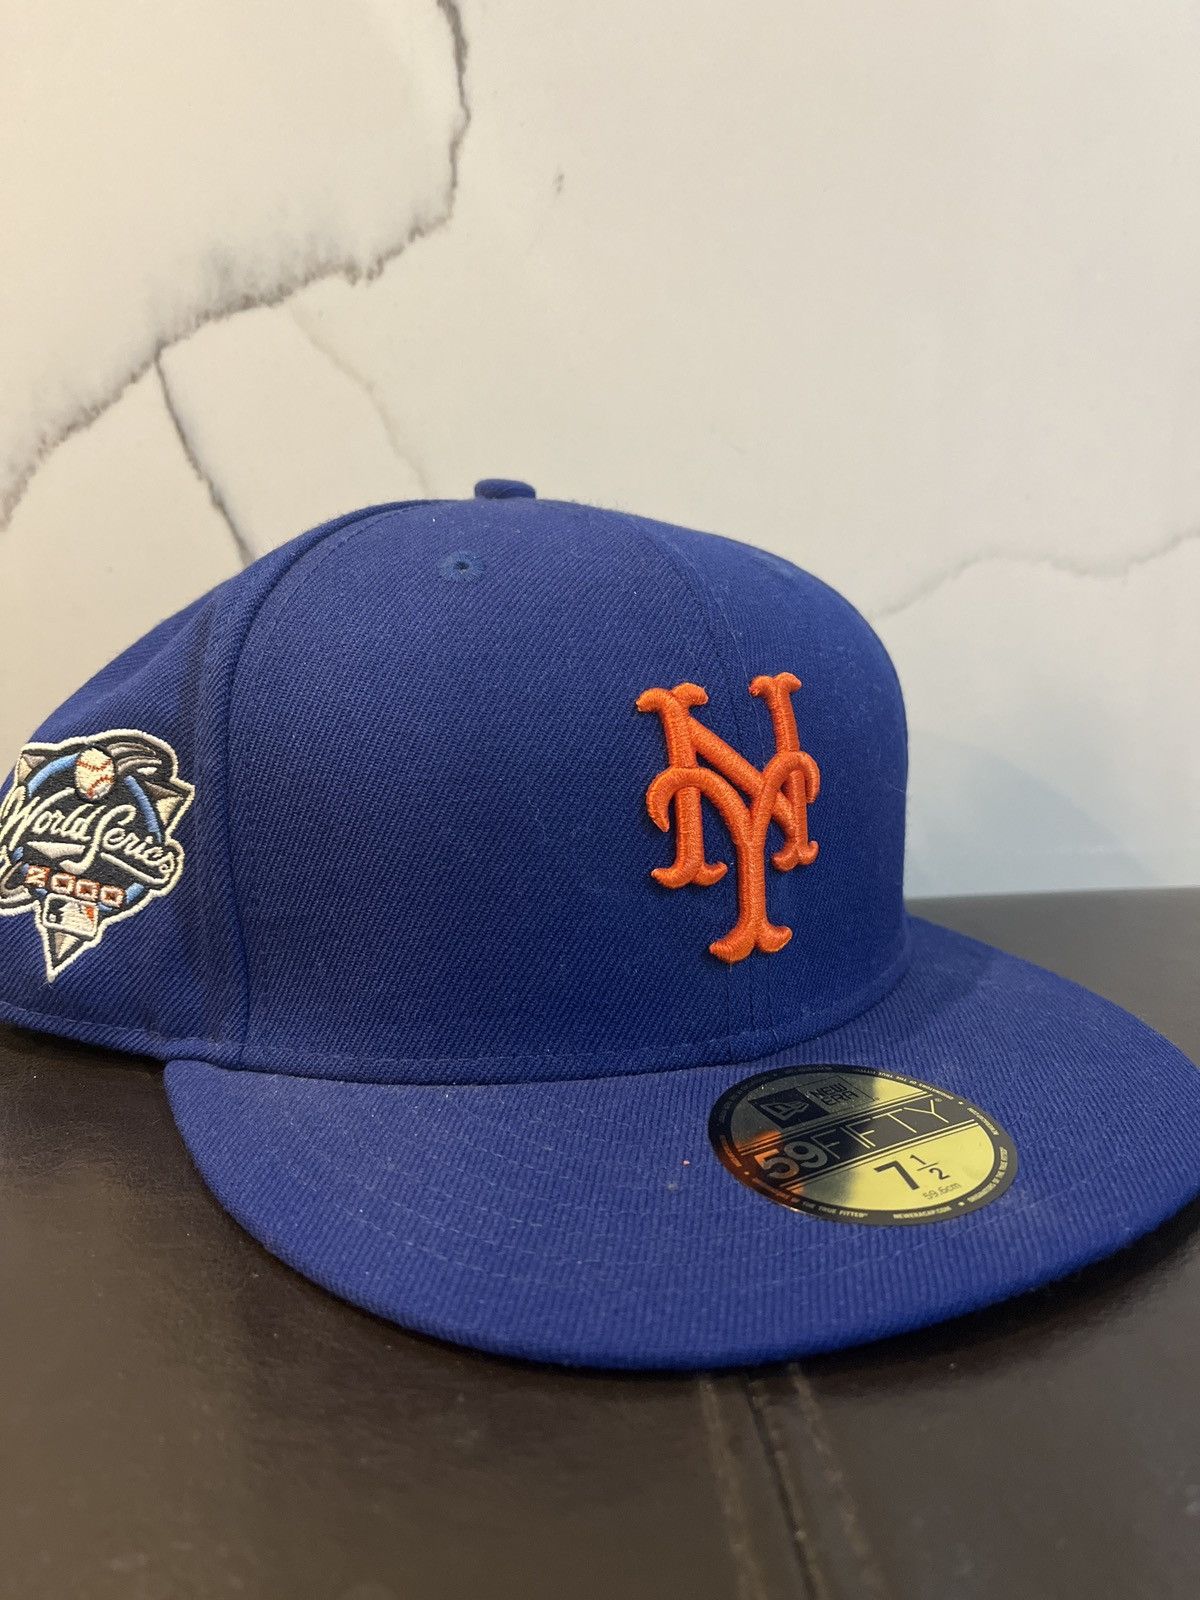 Kith for New Era New York Yankees 10 Year Anniversary 1999 World Series Low Profile 59Fifty Fitted Hat Anchor